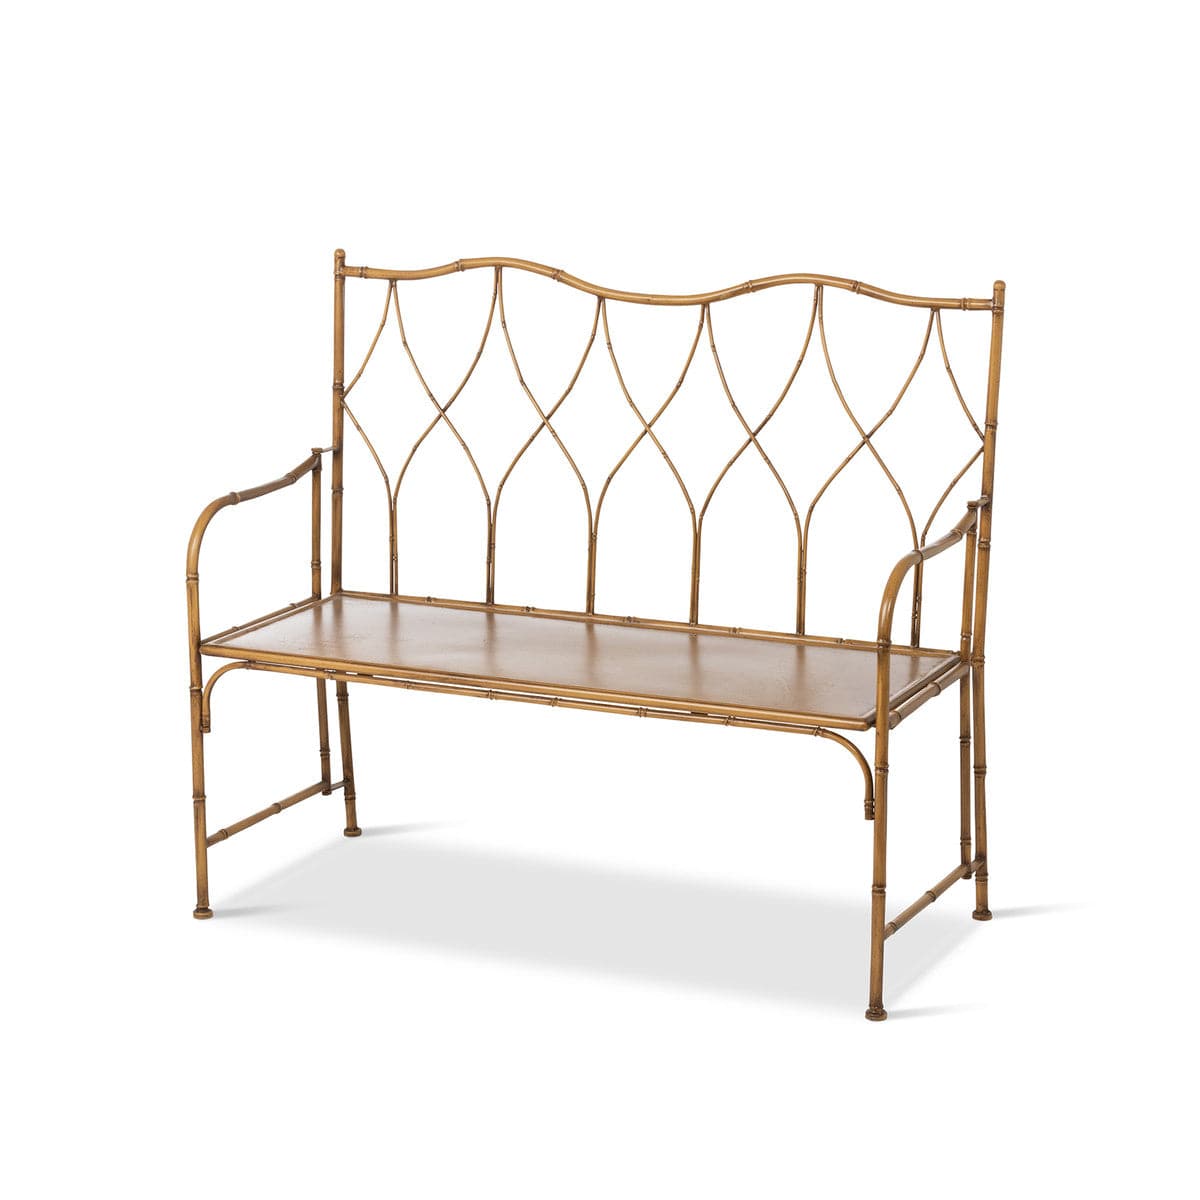 Parkhill Collection Roanoke Metal Porch Bench - Kitchen King Direct